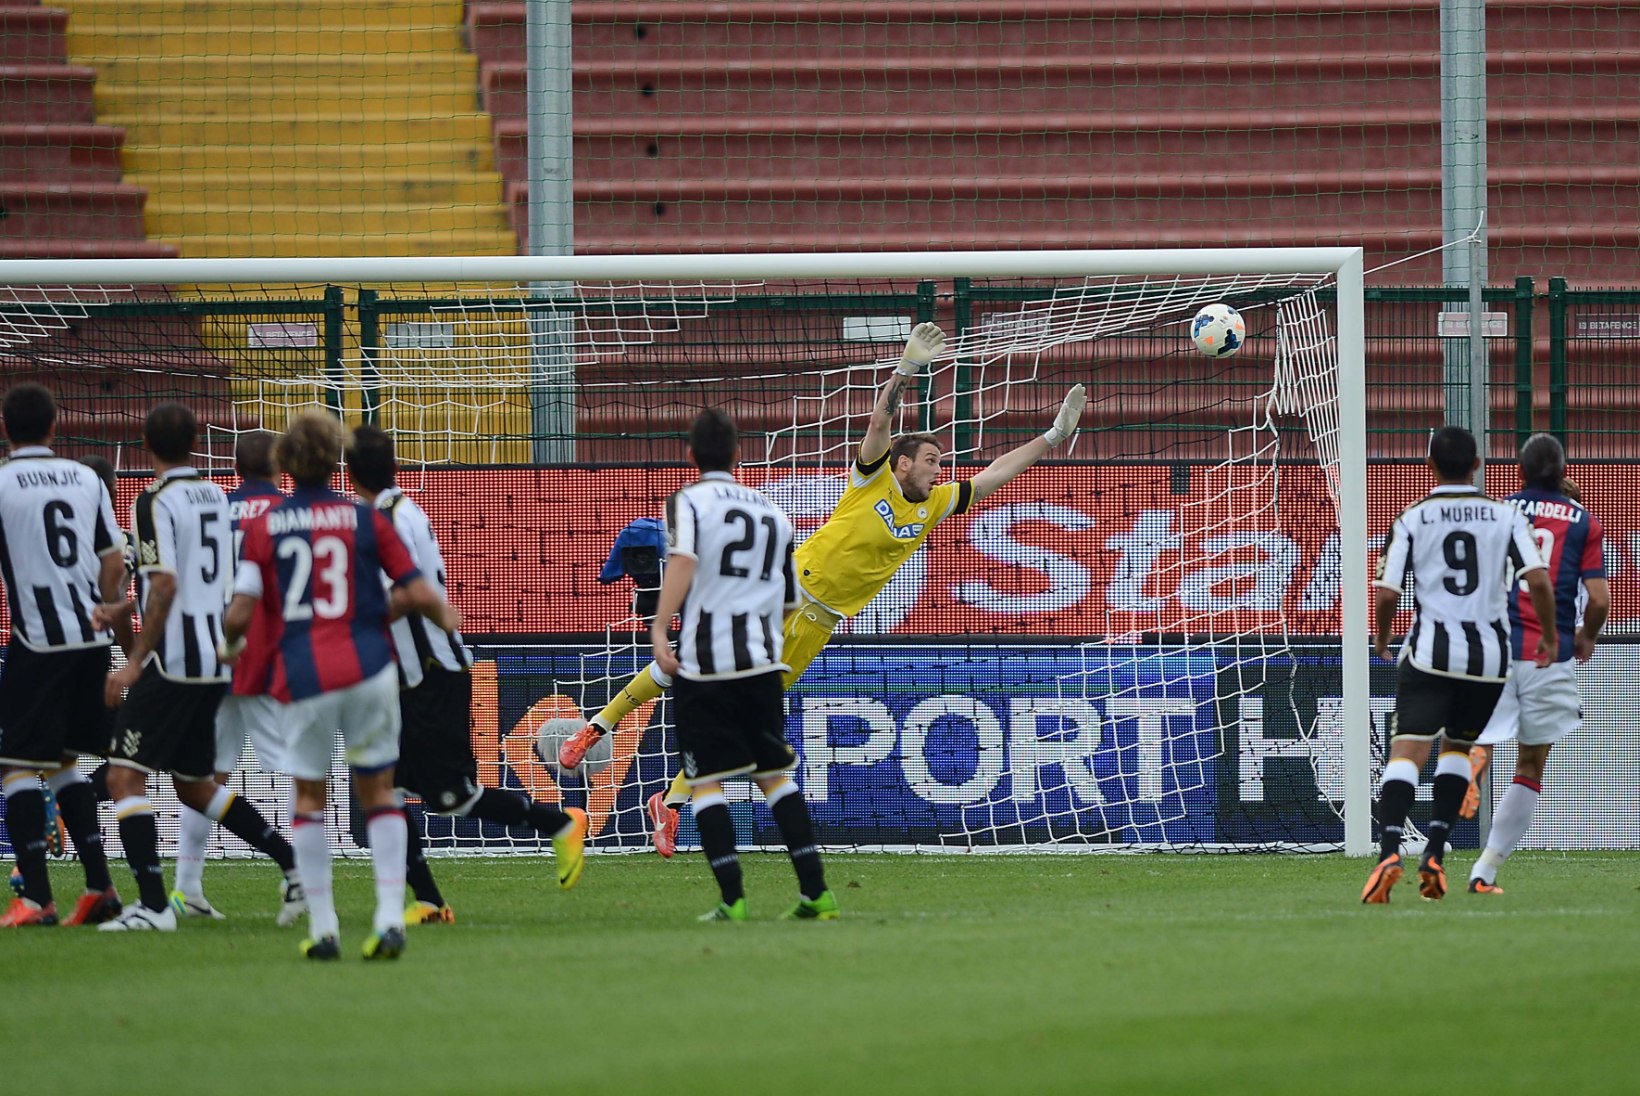 Serie A roundup: Derby d'Italia and Mario's penalty record